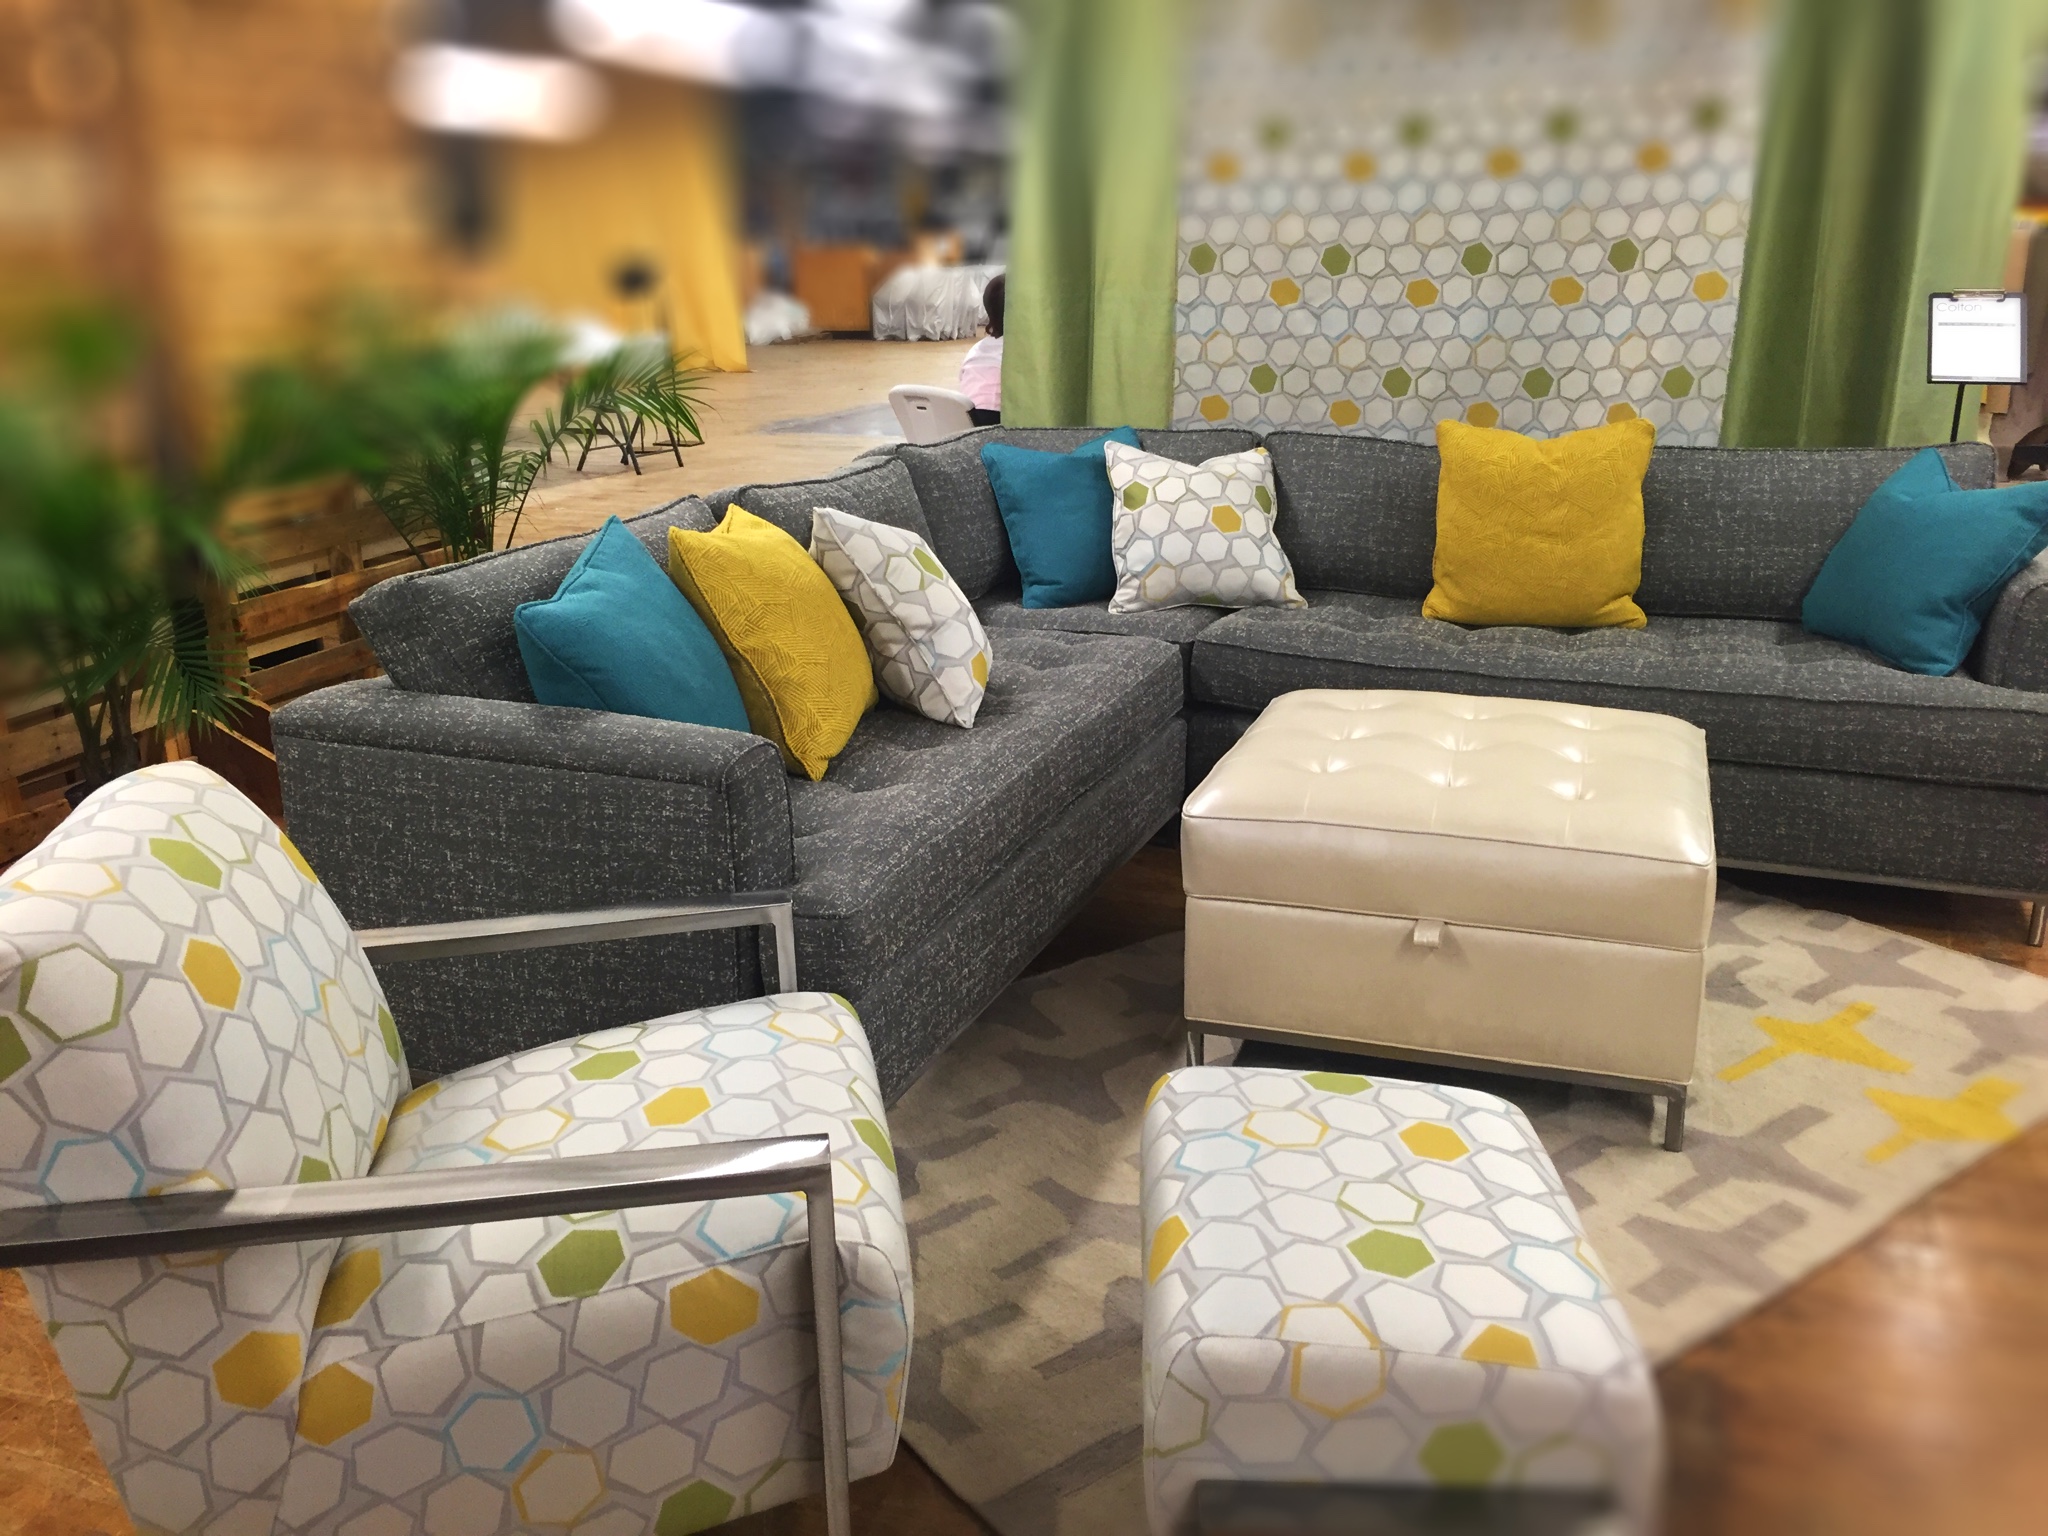 The Top 3 Interior Design Trends For 2016 According To Norwalk